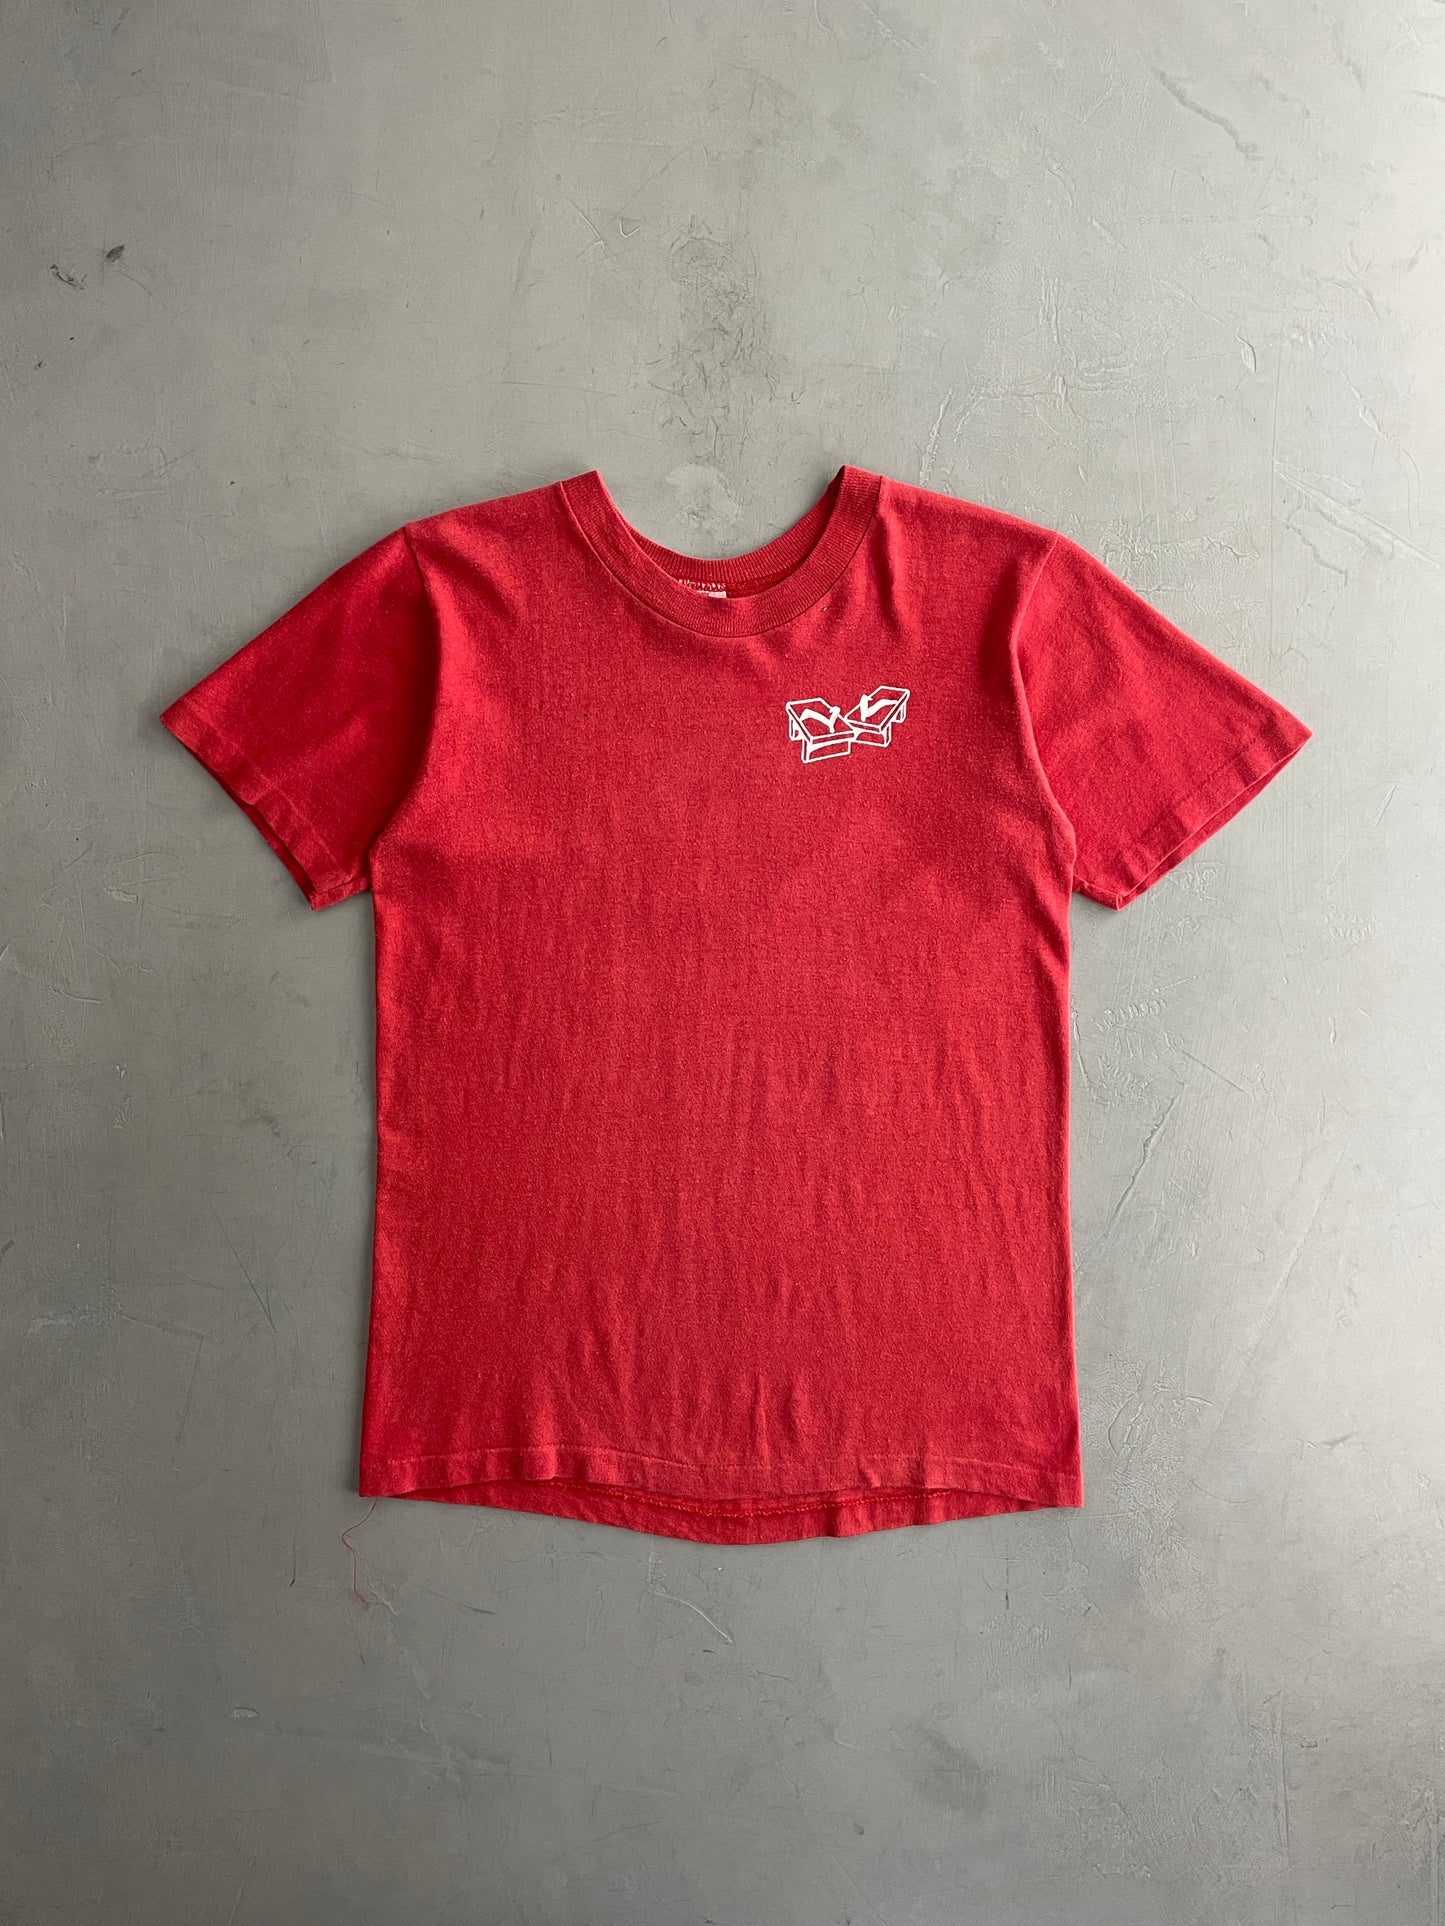 70's Year Of The Rat Tee [S]